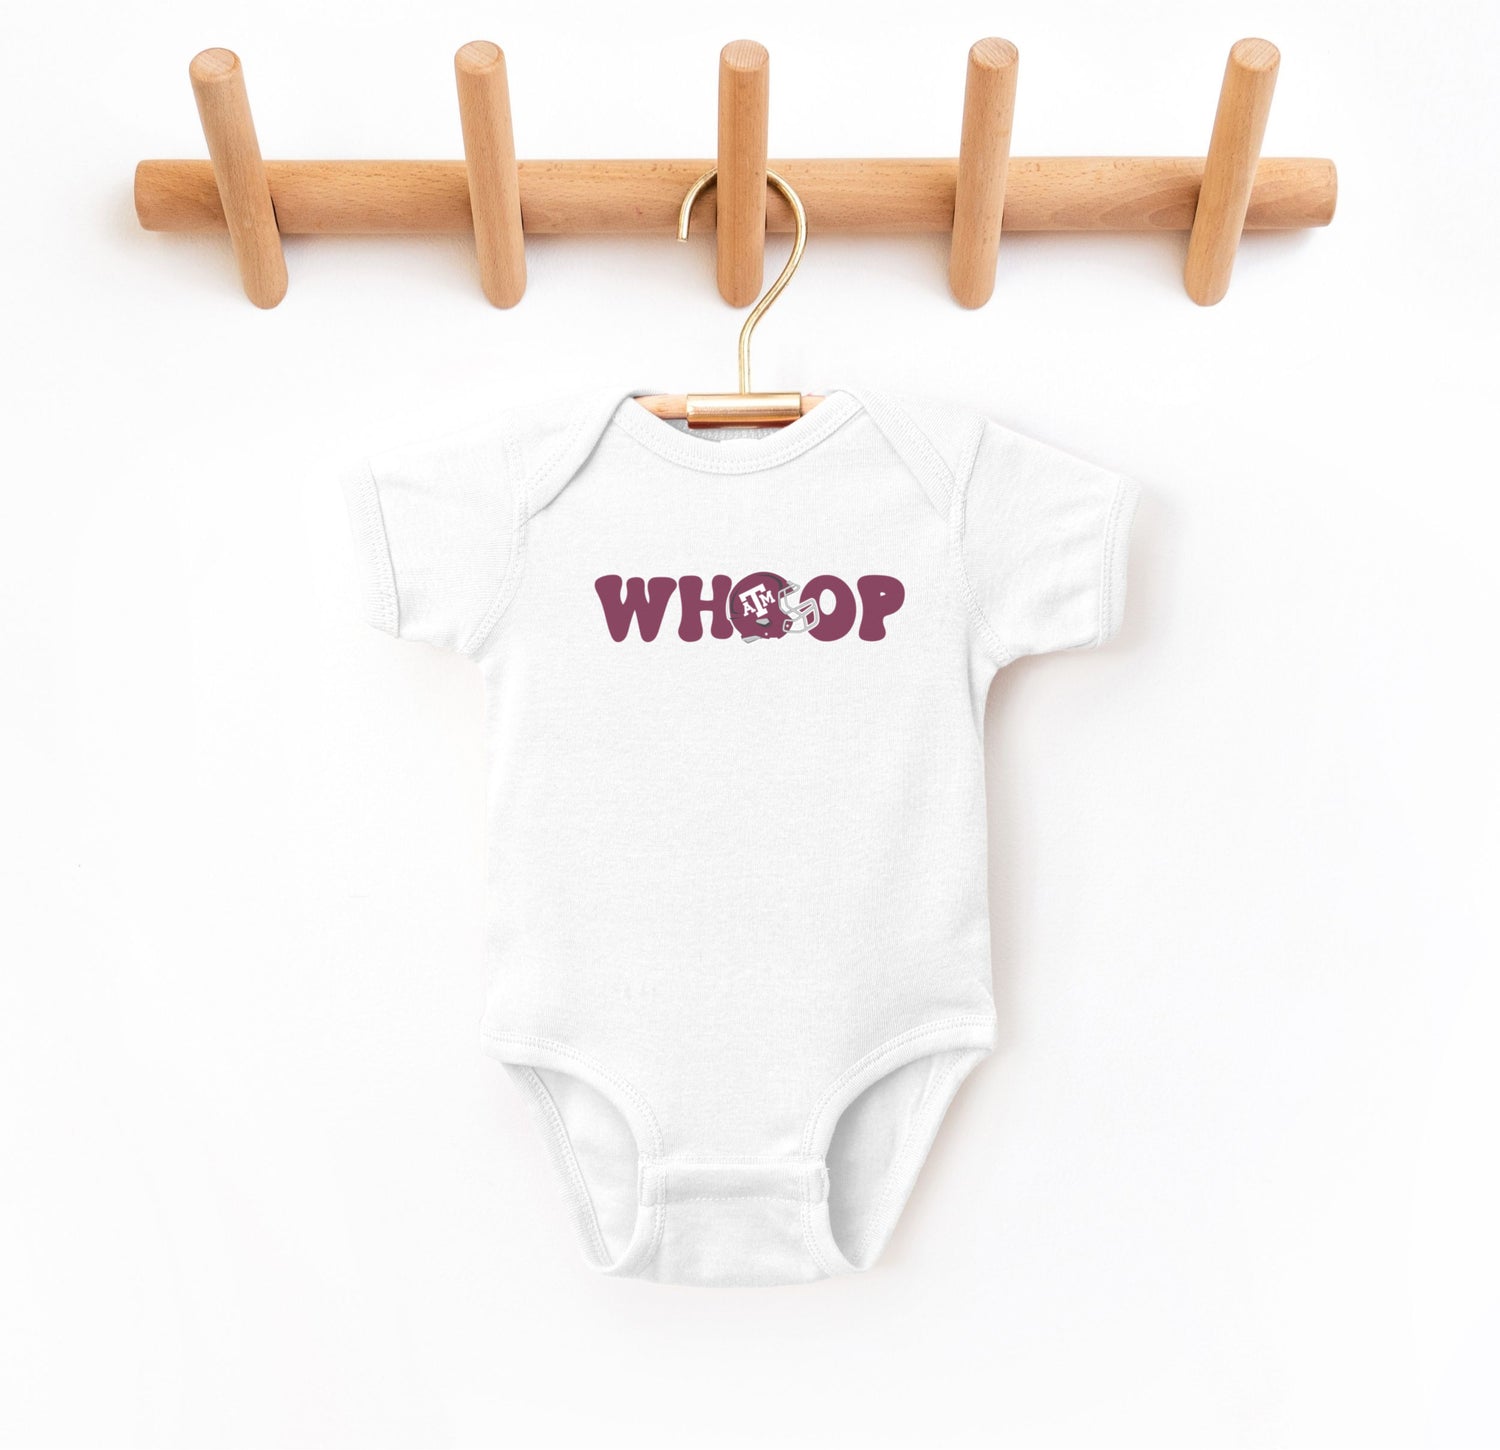 The White Infant Unisex Texas A&M Retro Whoop Bodysuit lays flat on a white background. The ﻿Texas A&M Retro Whoop﻿ graphic is in bold Maroon in a Vintage style.